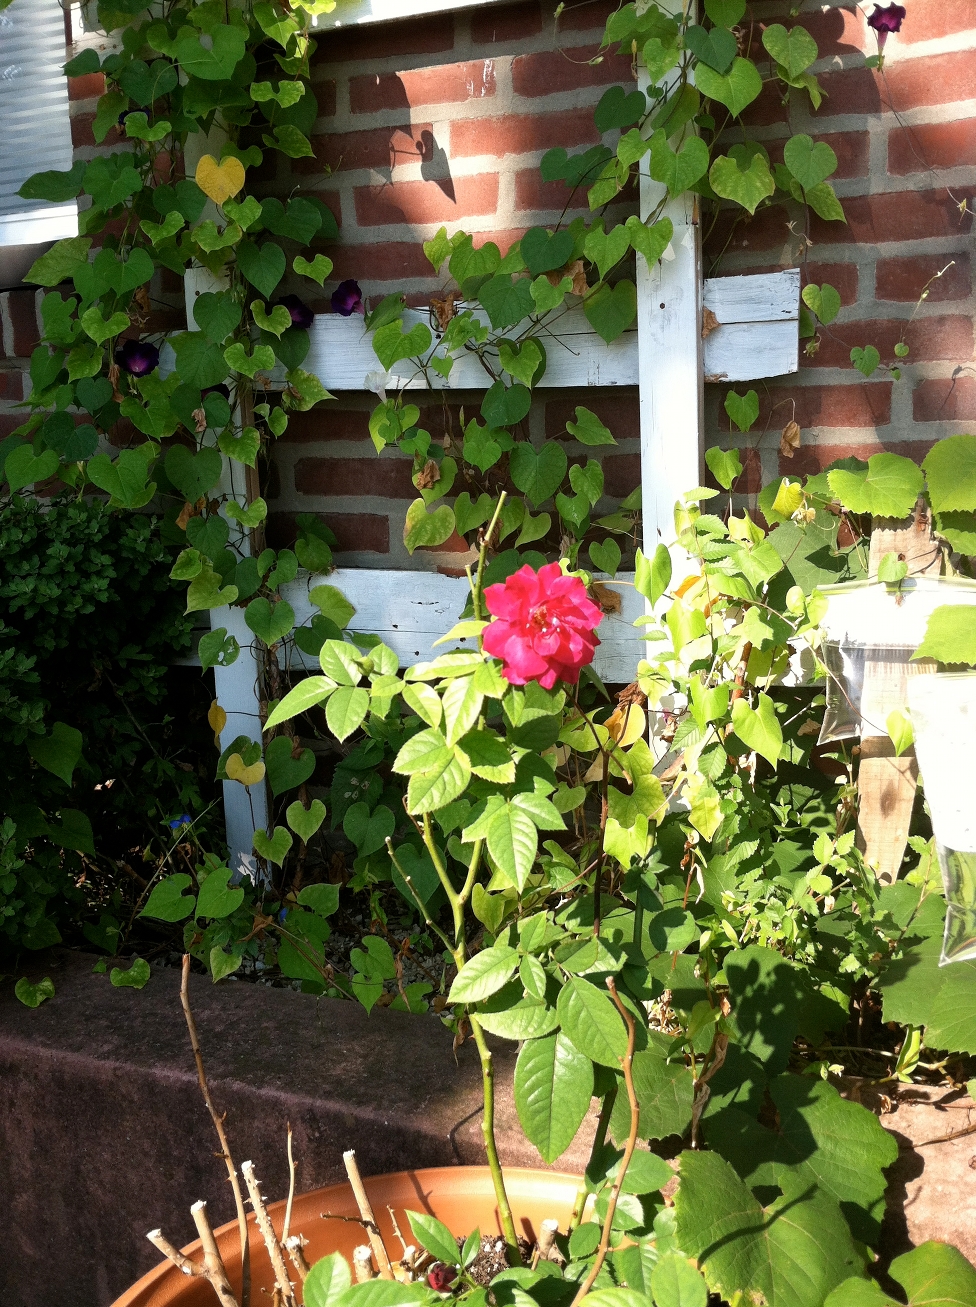 A grape vine and one of our roses.